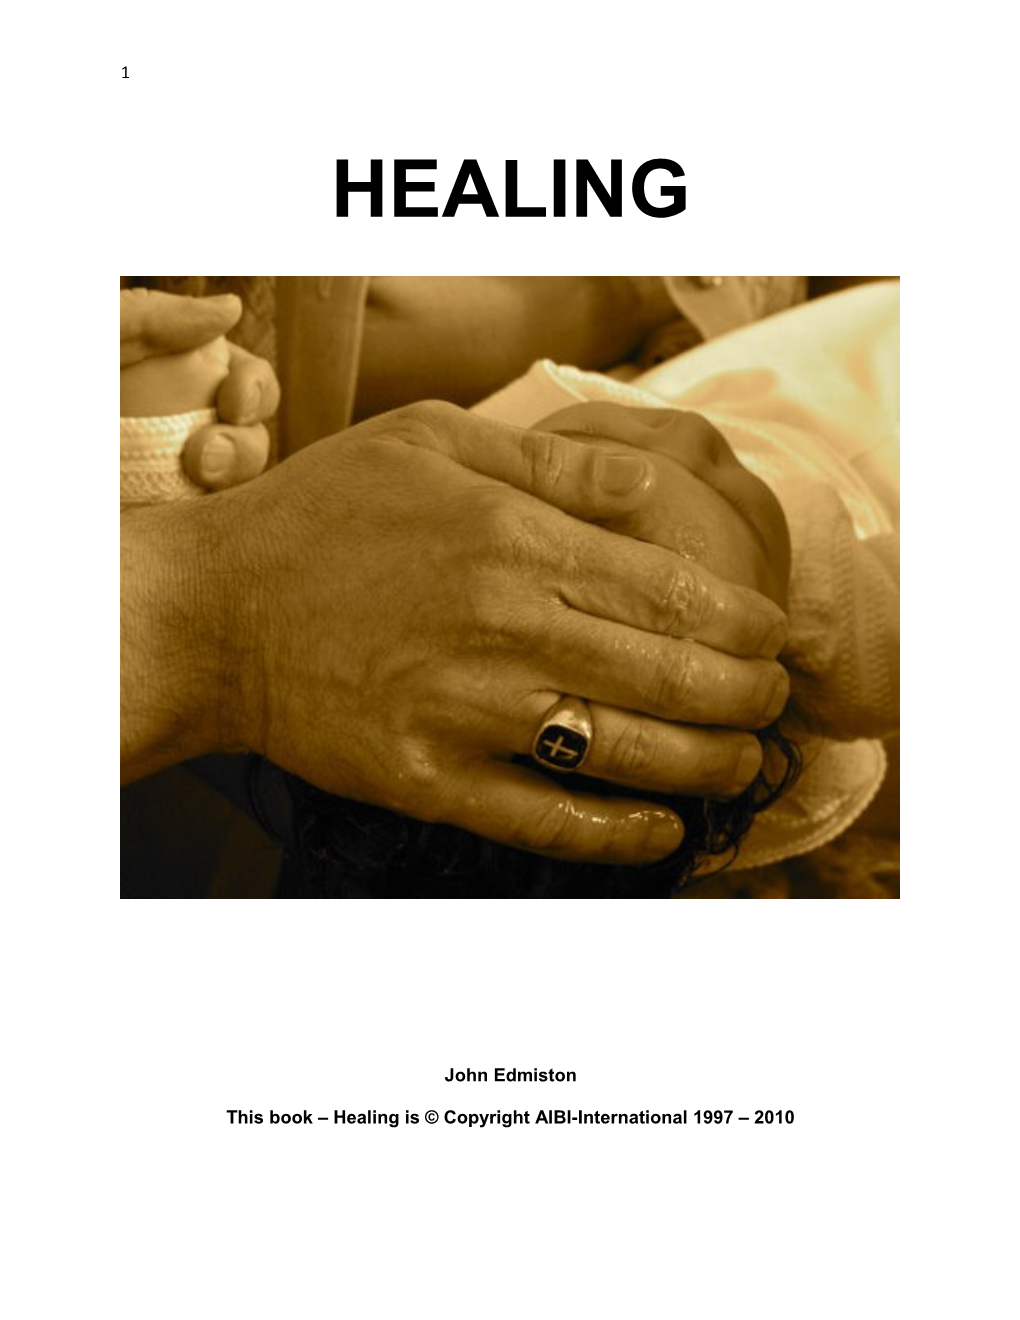 This Book Healing Is Copyright AIBI-International 1997 2010